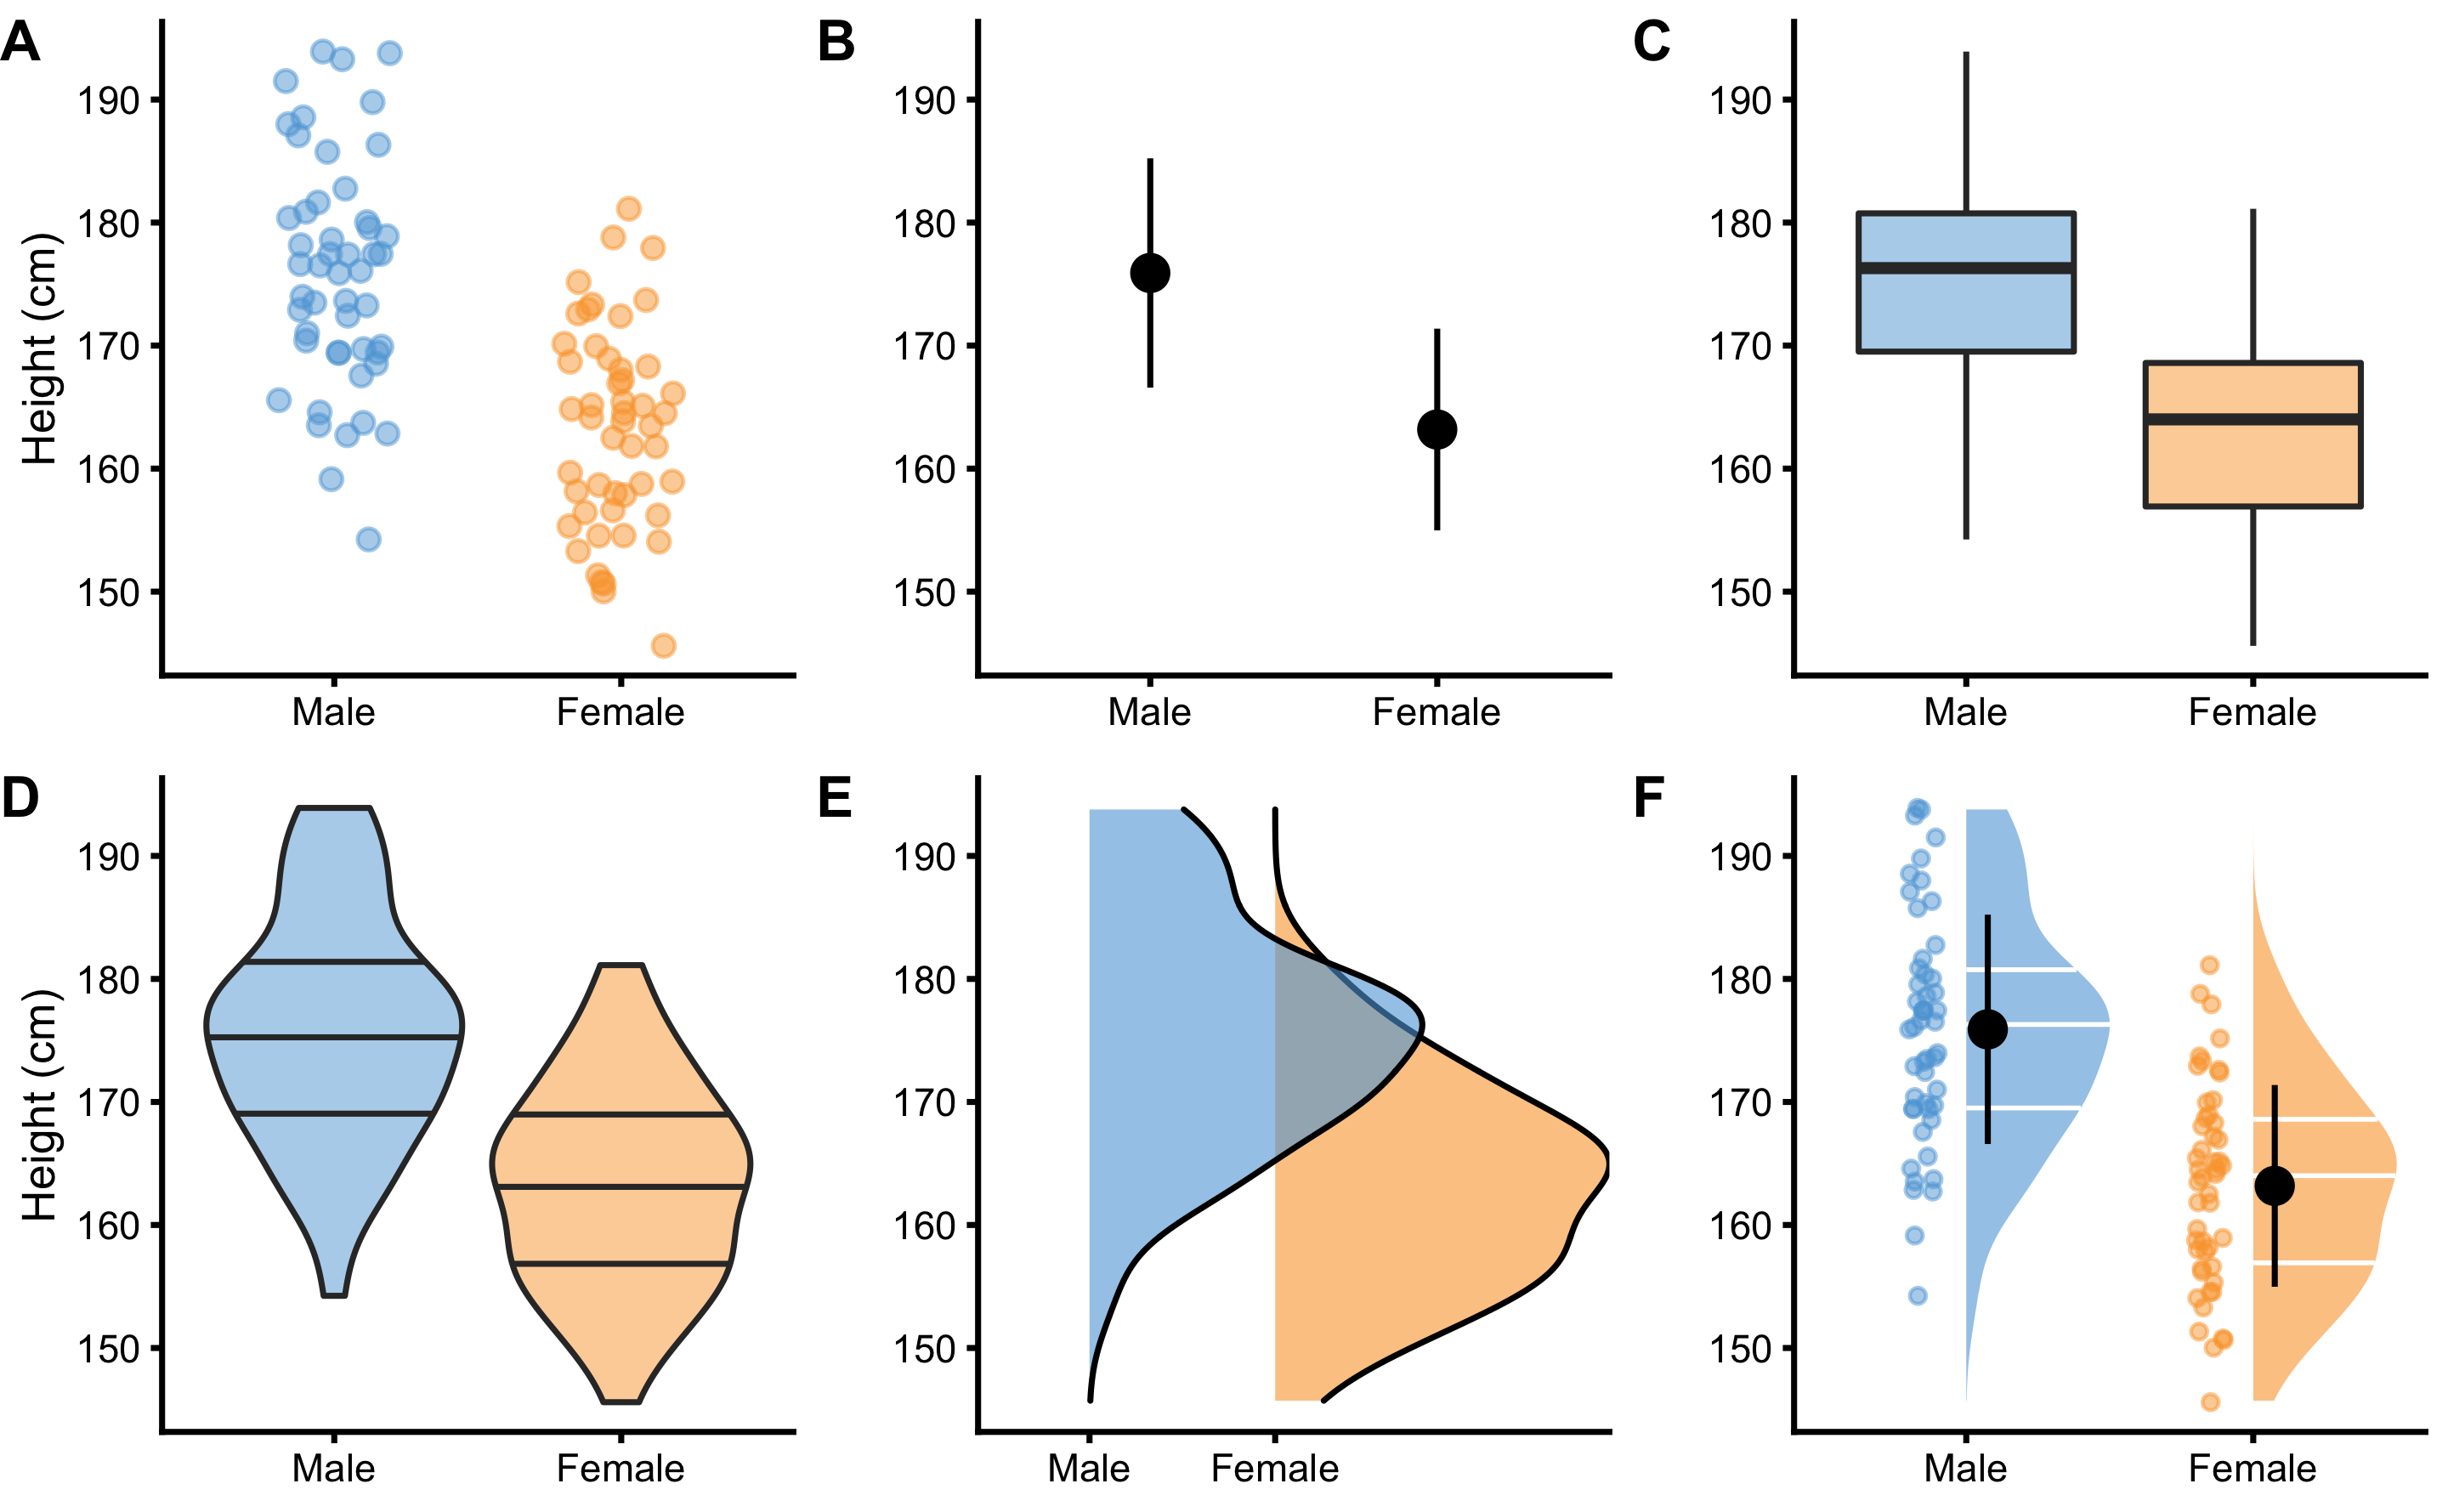 Common techniques to visualize independent groups observations. Before any analysis takes place, it is always a good practice to visualize the data first. Ideally, we want to visualize the complete data set, rather than only provide descriptive summaries, such as means. A. Simple scatter-plot with jitter to avoid overlap between the points. B. Mean and standard deviation as error bars. C. Box-plot. Horizontal line represents median, or 50th percentile, whereas boxes represent 25th and 75th percentile. Vertical lines usually represent min and max, although they can extend up to 1.5xIQR (inter-quartile range) with point outside of that interval plotted as outliers. D. Violin plots representing double-side density plots with 25th, 50th and 75th percentile lines. E. Density plots indicating sample distribution. F. Raincloud plot (5,6) which combine kernel density plots as clouds with accompanying 25th, 50th and 75th percentile lines, mean±SD error bars and jittered points as rain